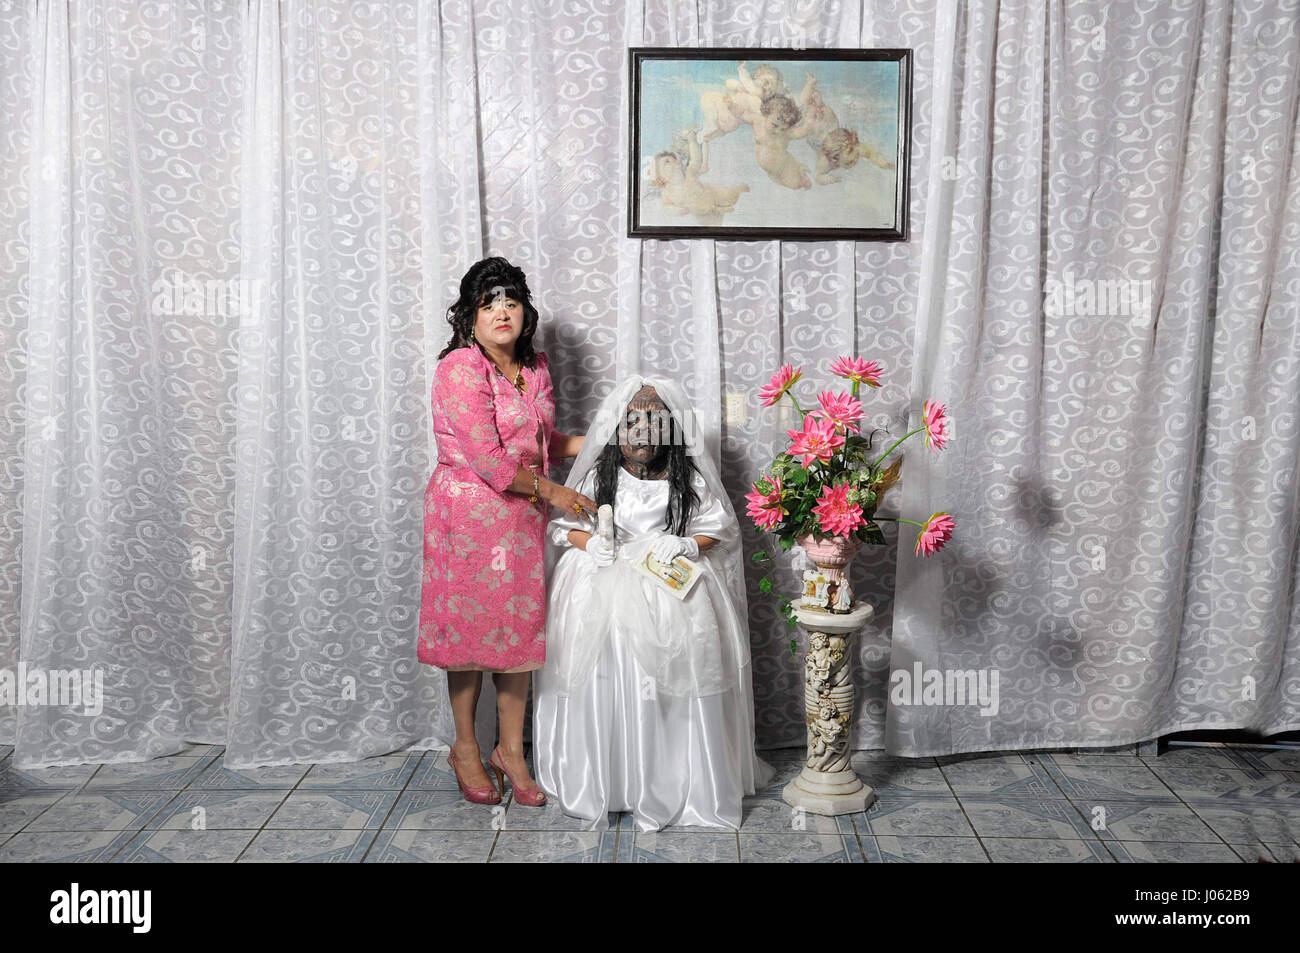 EYE-OPENING images recreate the monsters that haunt Mexicans who follow their traditional beliefs. The series of spectacular shots show large monsters dressed in flamboyant dresses and face masks watching television, at a birthday party and sitting in a workshop. One image even shows a monster dressed as a bride and one sitting on a bed underneath a crucifix. The photographs are the work of Mexican photographer Diego Moreno (24). To take the pictures, Diego used a Nikon D90 camera. Diego Moreno / mediadrumworld.com Stock Photo